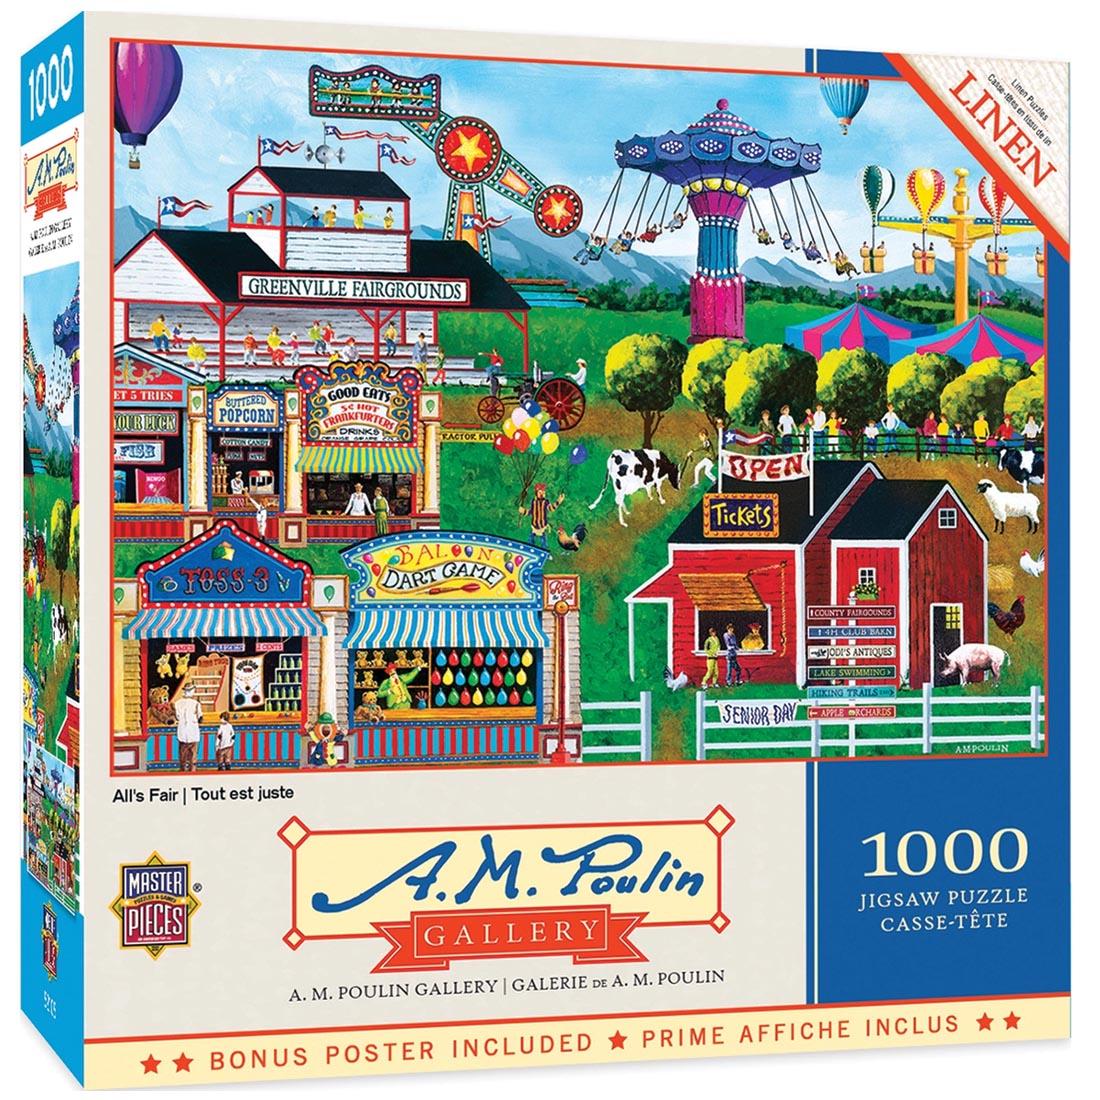 All's Fair 1000-Piece Puzzle by MasterPieces